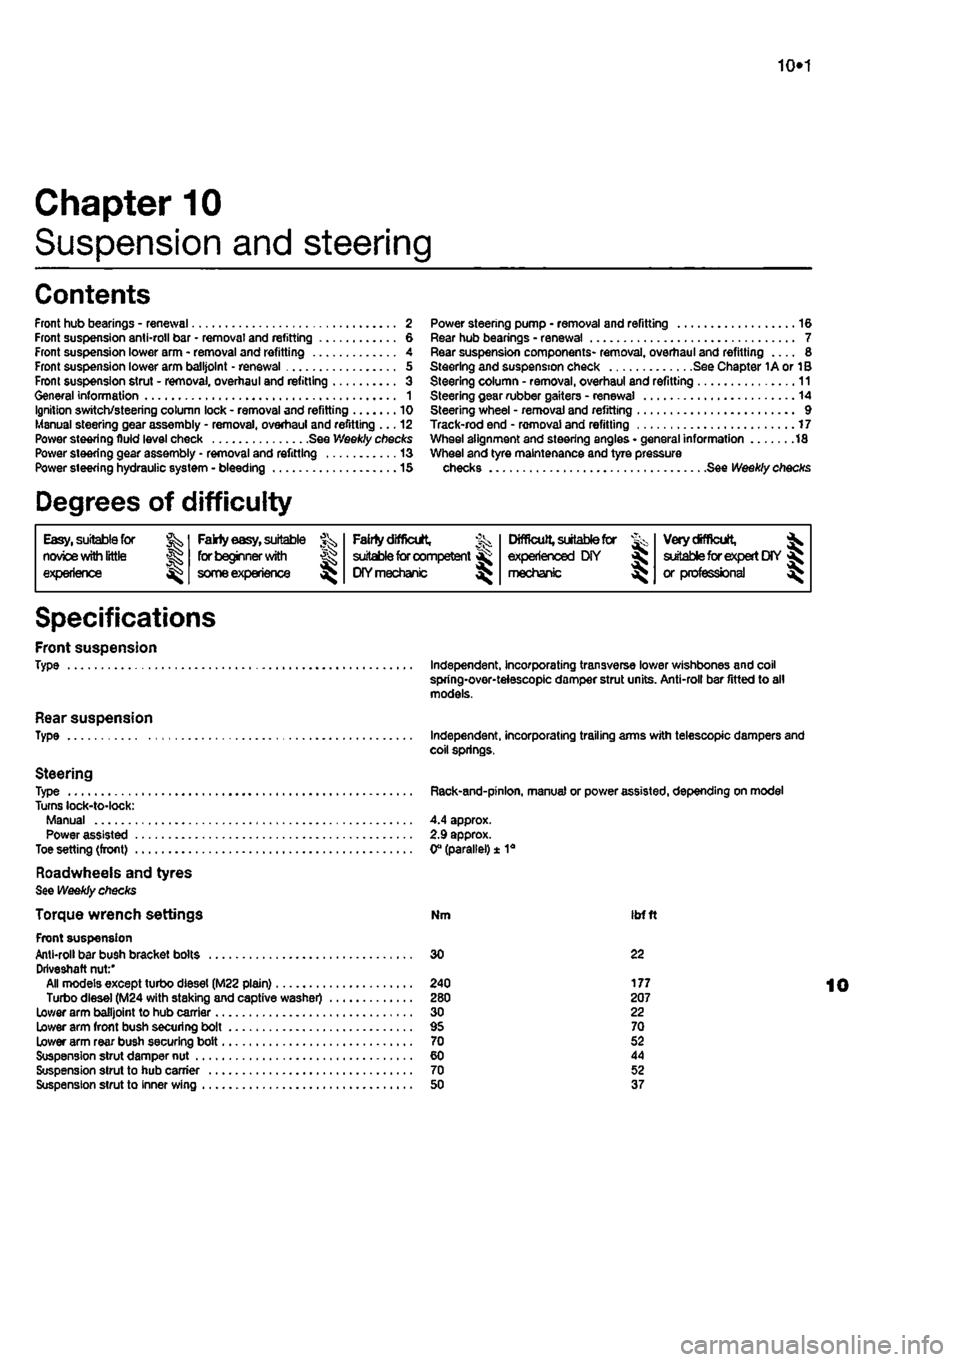 FIAT PUNTO 1995 176 / 1.G Workshop Manual 
10*1 
Chapter 10 
Suspension and steering 
Contents 
Front hub bearings - renewal 2 Front suspension anti-roll bar • removal and refitting 6 Front suspension lower arm - removal and refitting 4 Fro